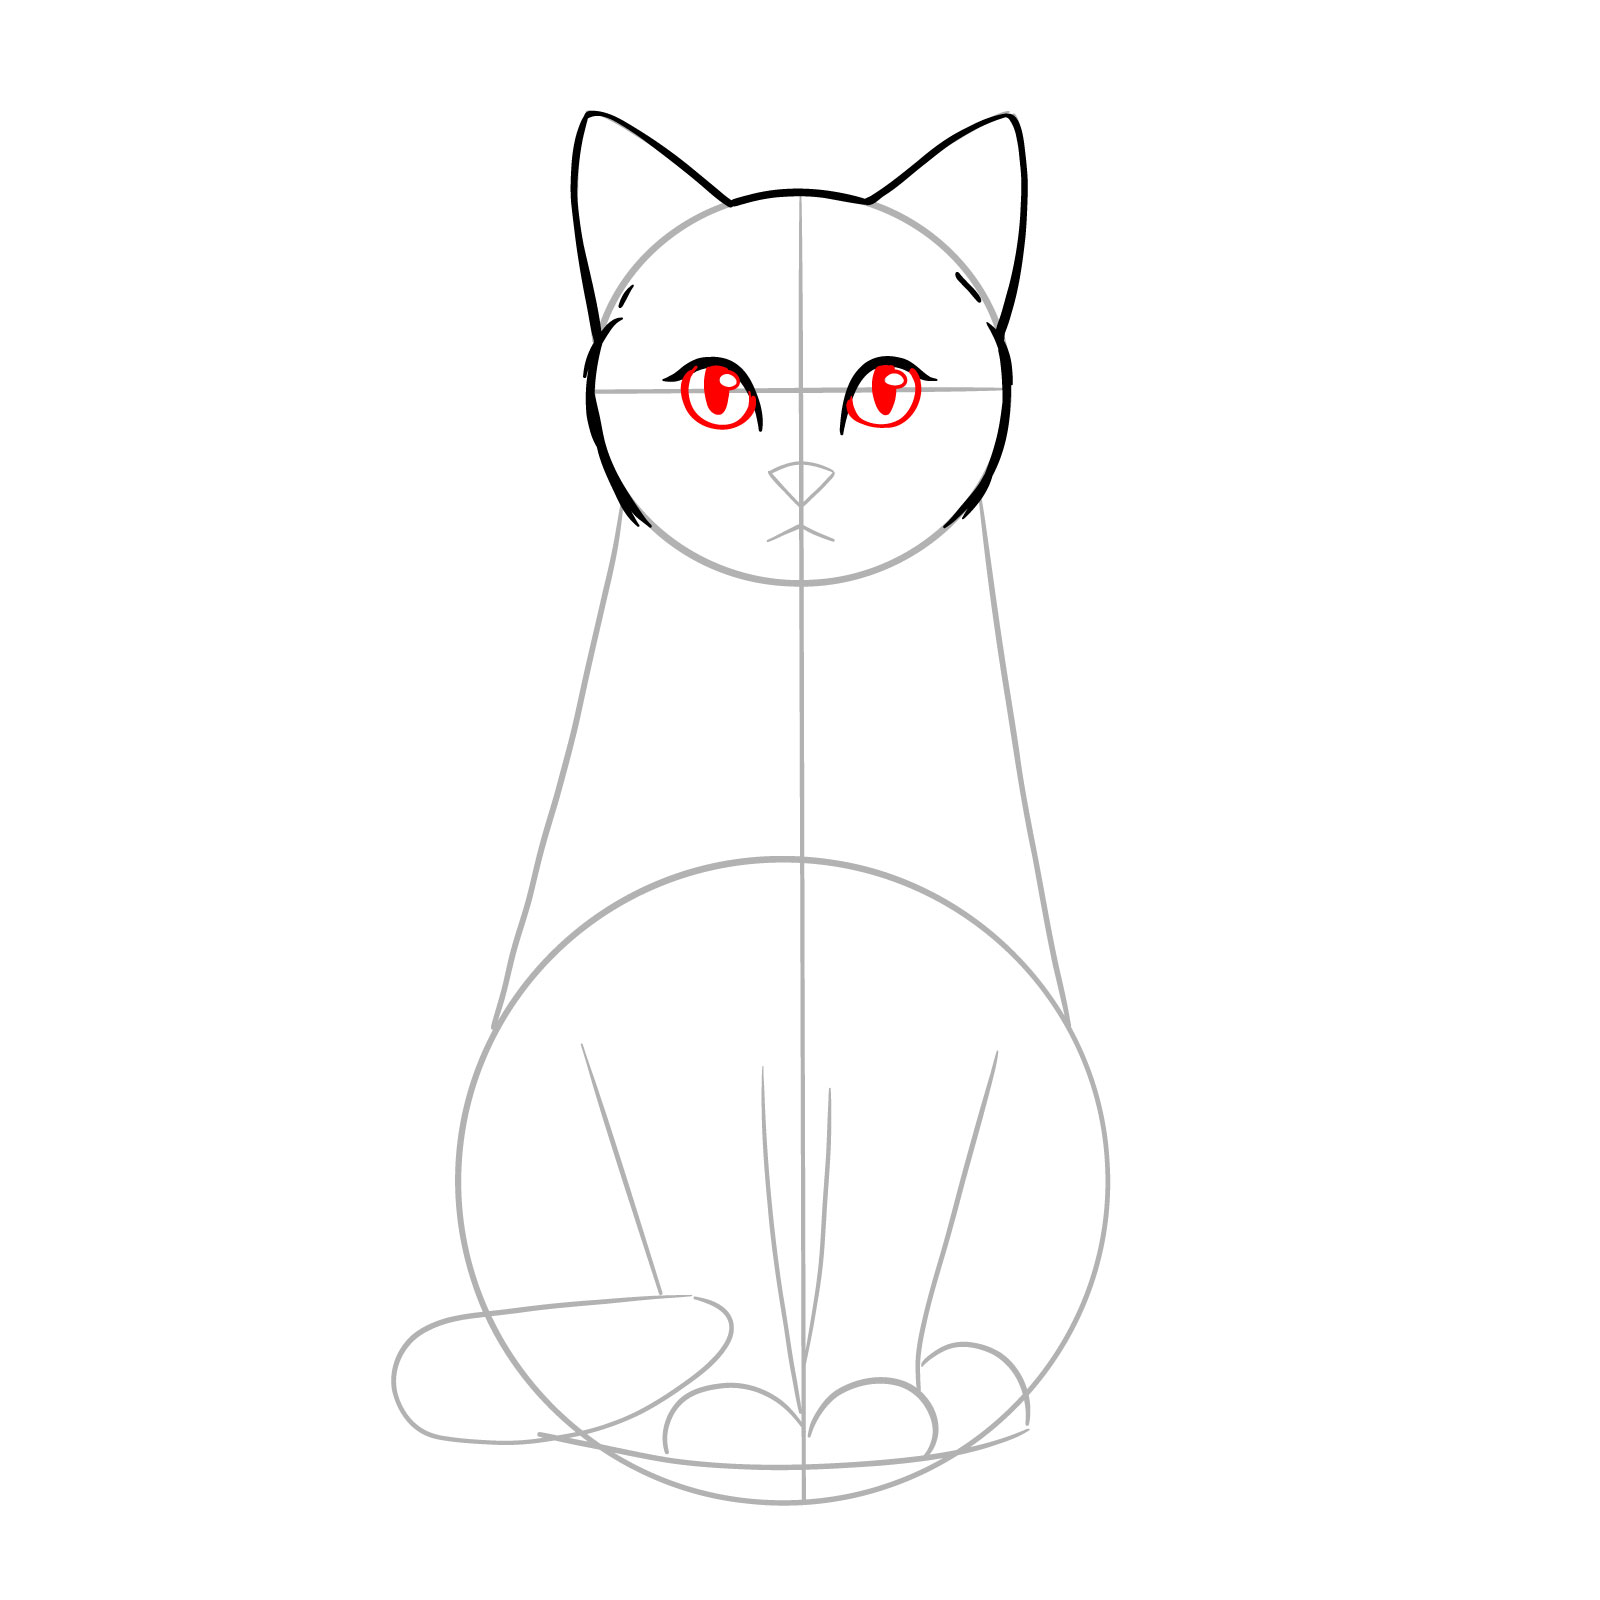 Detailed eye shapes and pupils in a sitting cat sketch - step 06